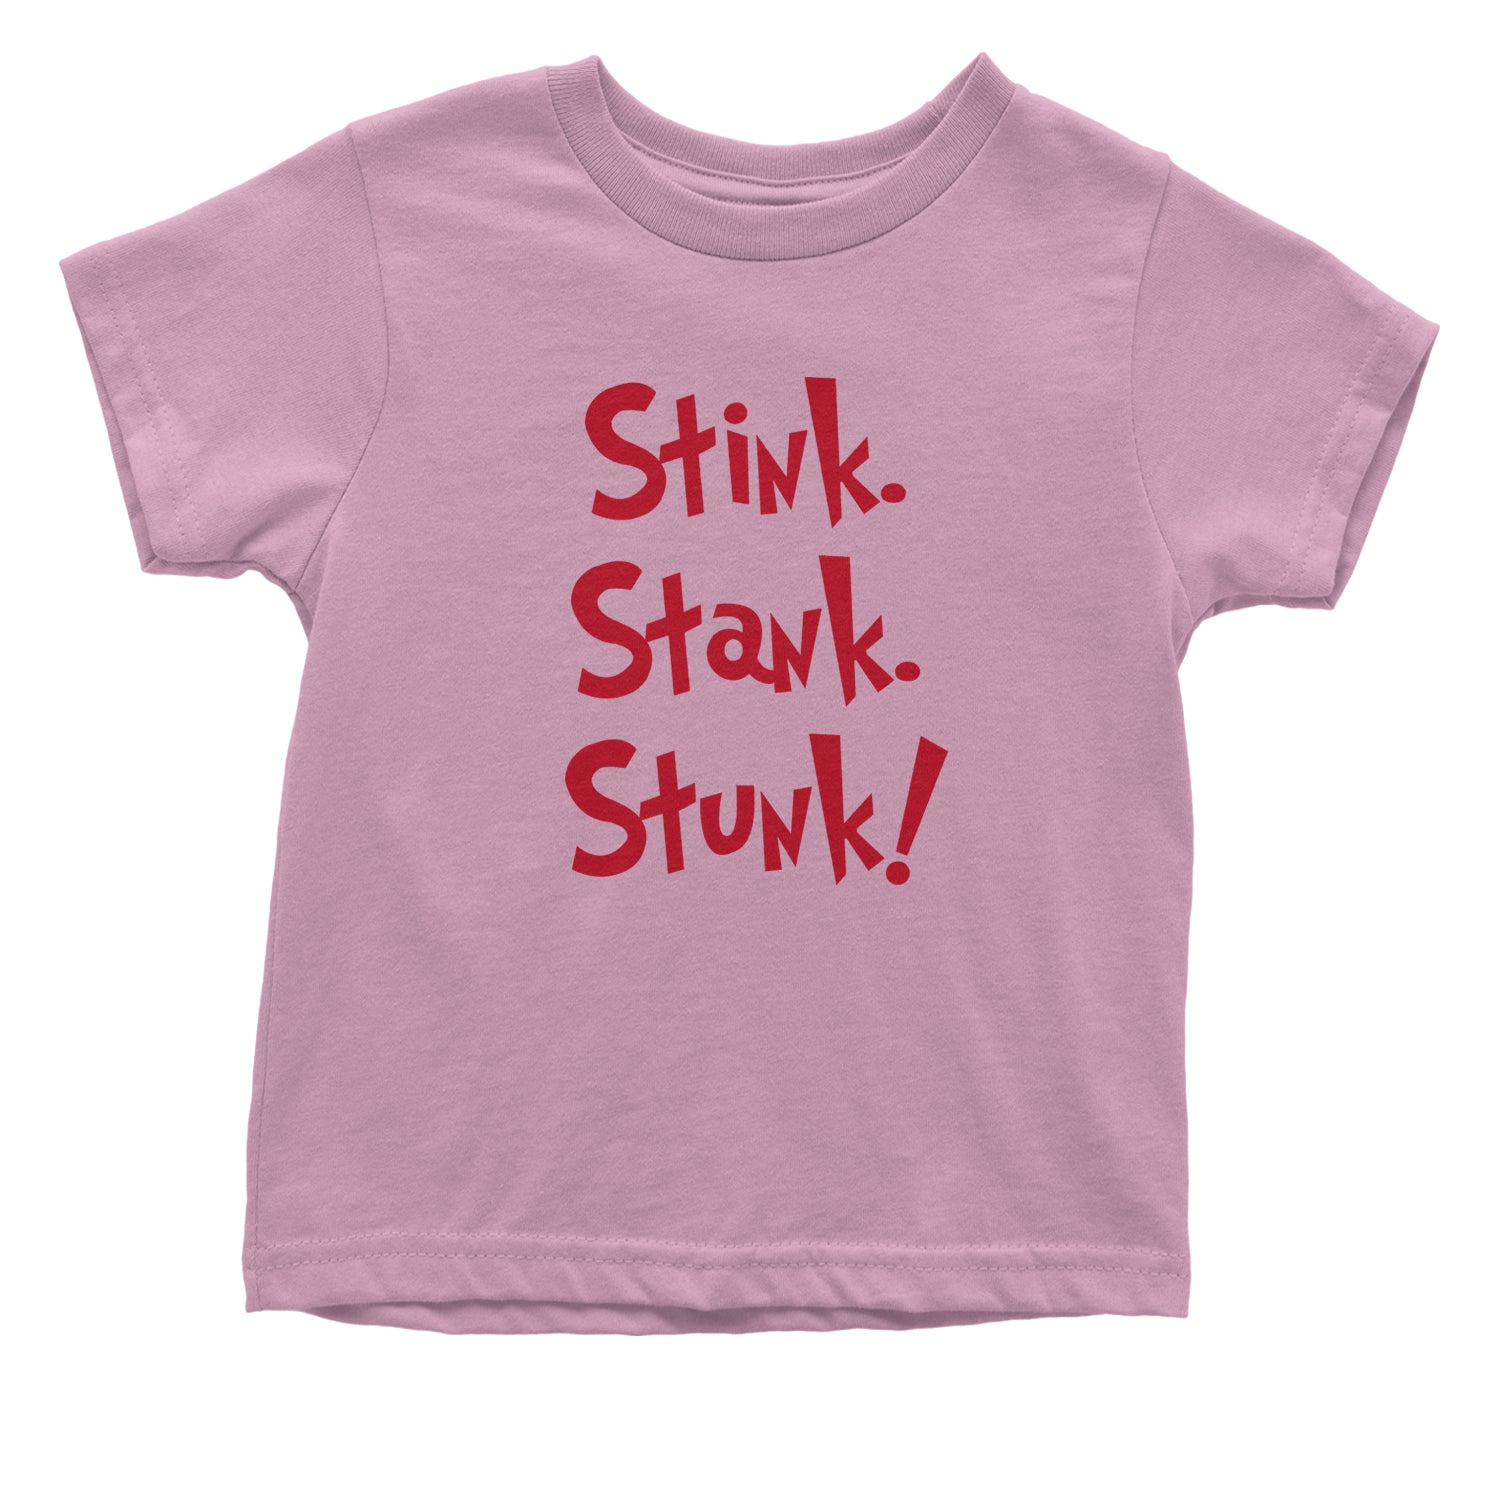 Stink Stank Stunk Grinch Infant One-Piece Romper Bodysuit and Toddler T-shirt christmas, holiday, sweater, ugly, xmas by Expression Tees